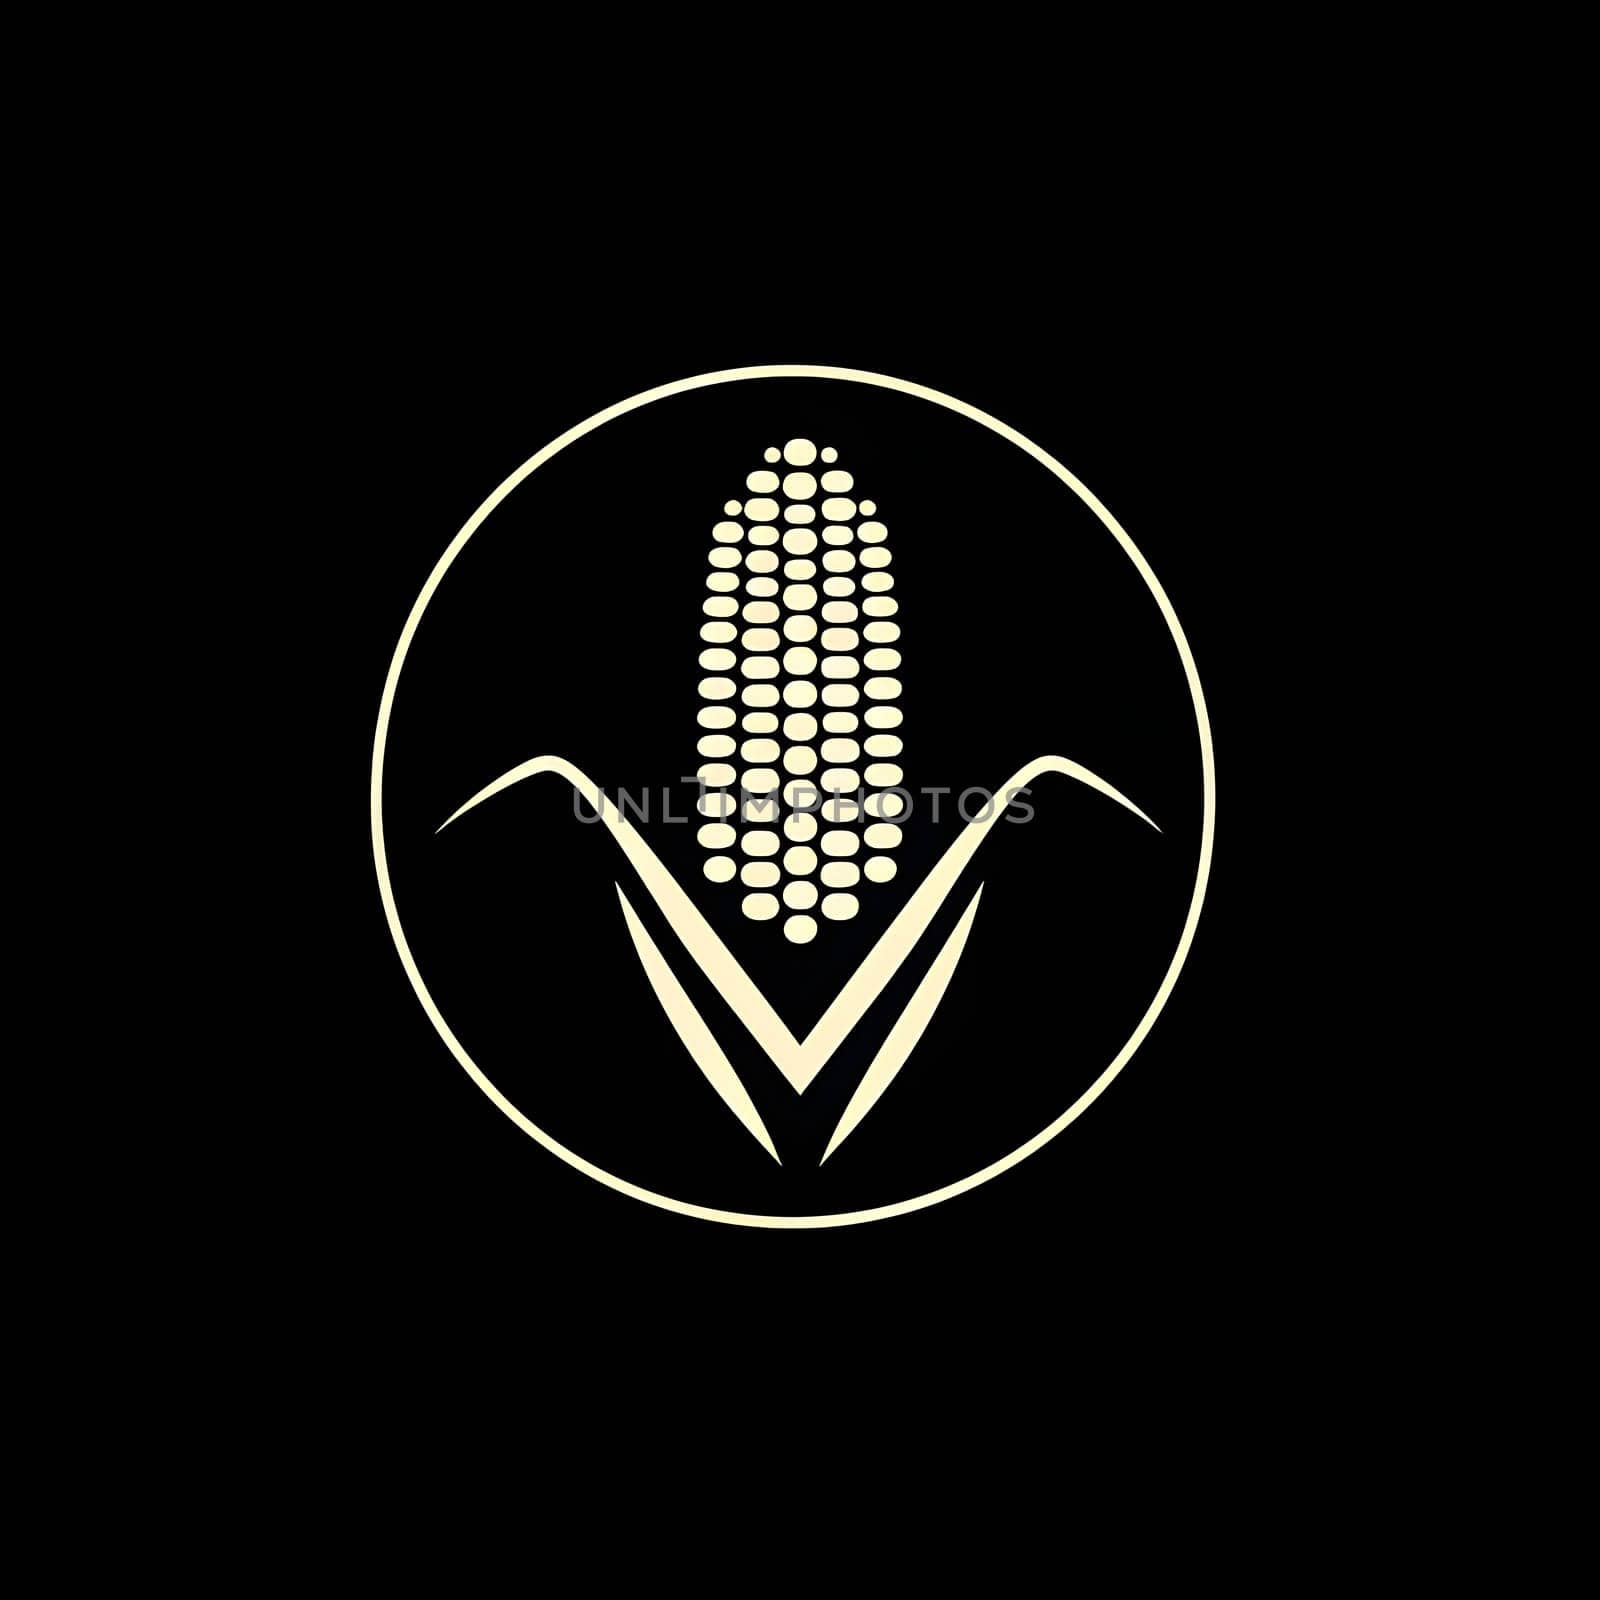 Logo in circle corn cob on black isolation background. Corn as a dish of thanksgiving for the harvest. by ThemesS